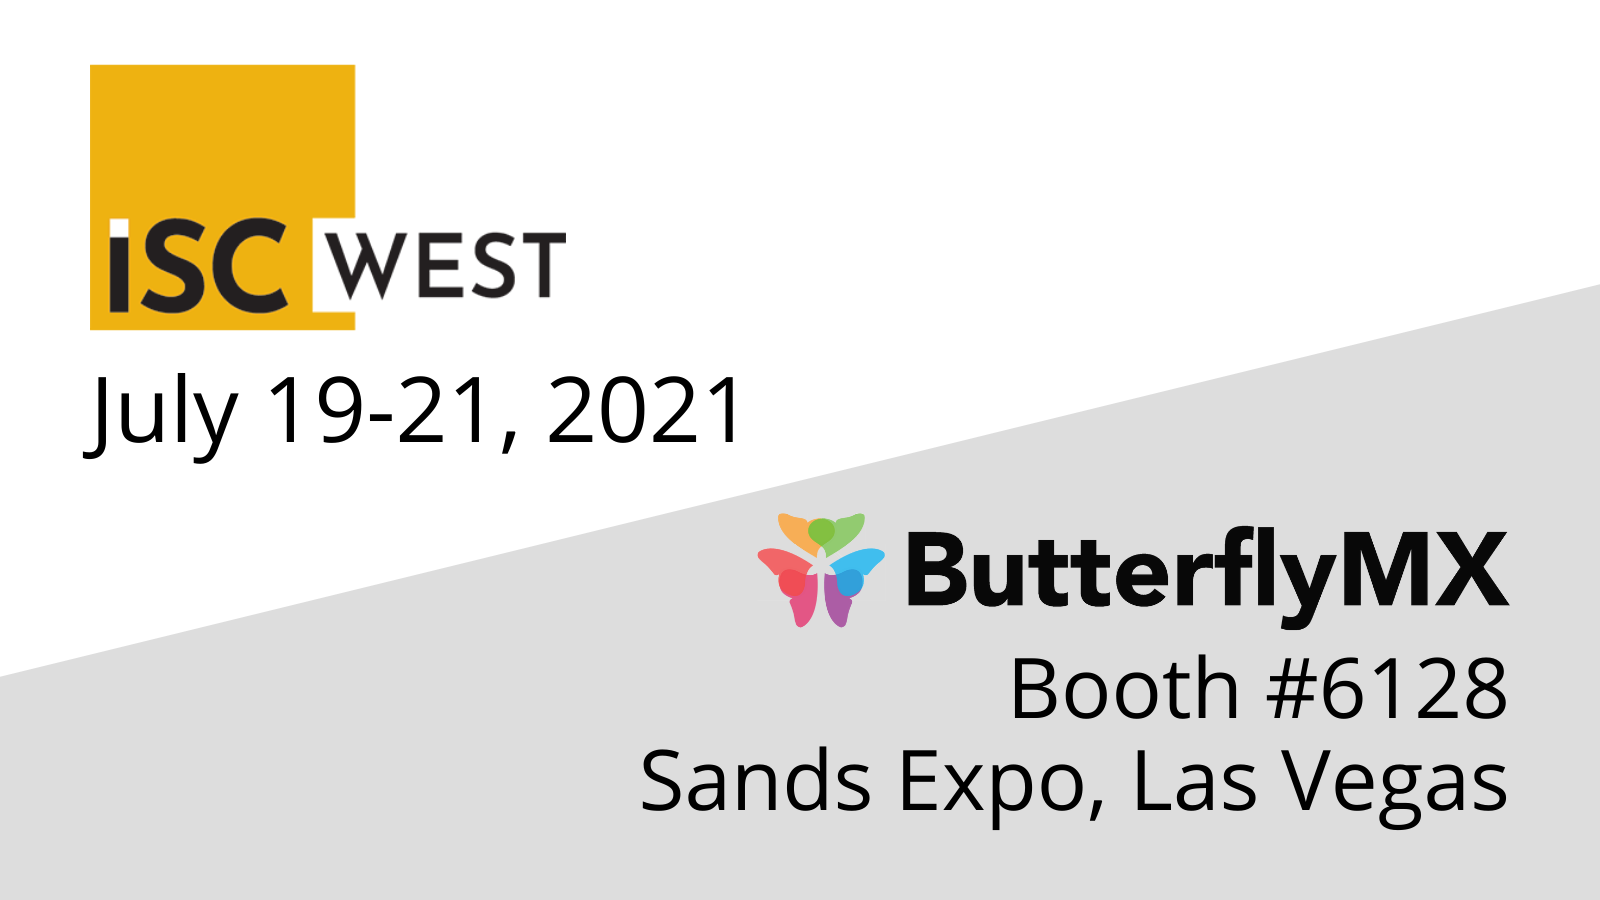 Meet ButterflyMX at ISC West in Las Vegas Booth 6128